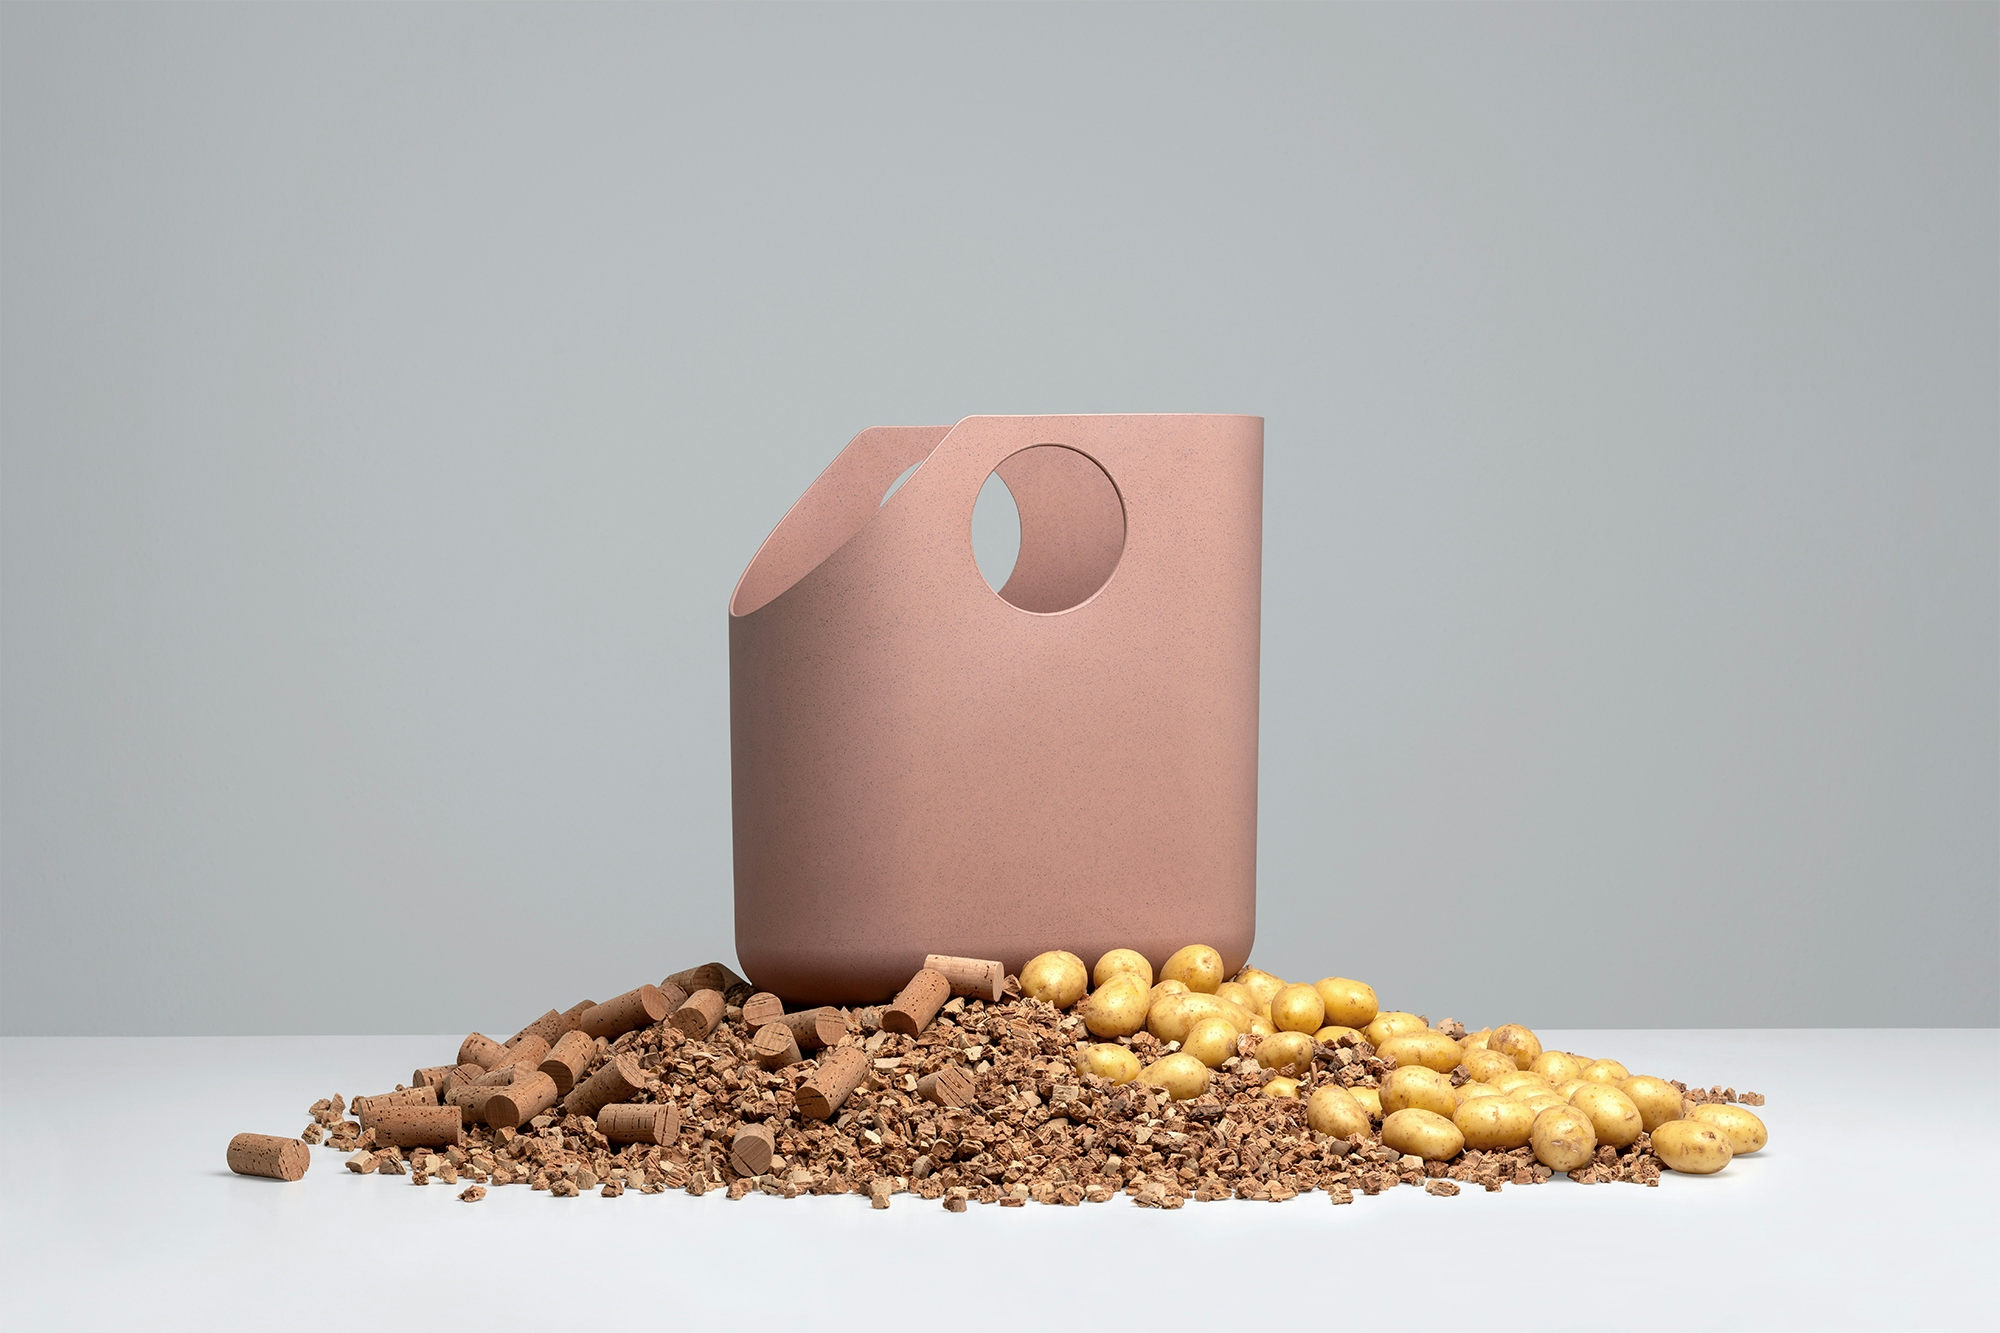 a design bag forming part of a modular storage system on a pile of cork and potatoes, representing the origin of its material